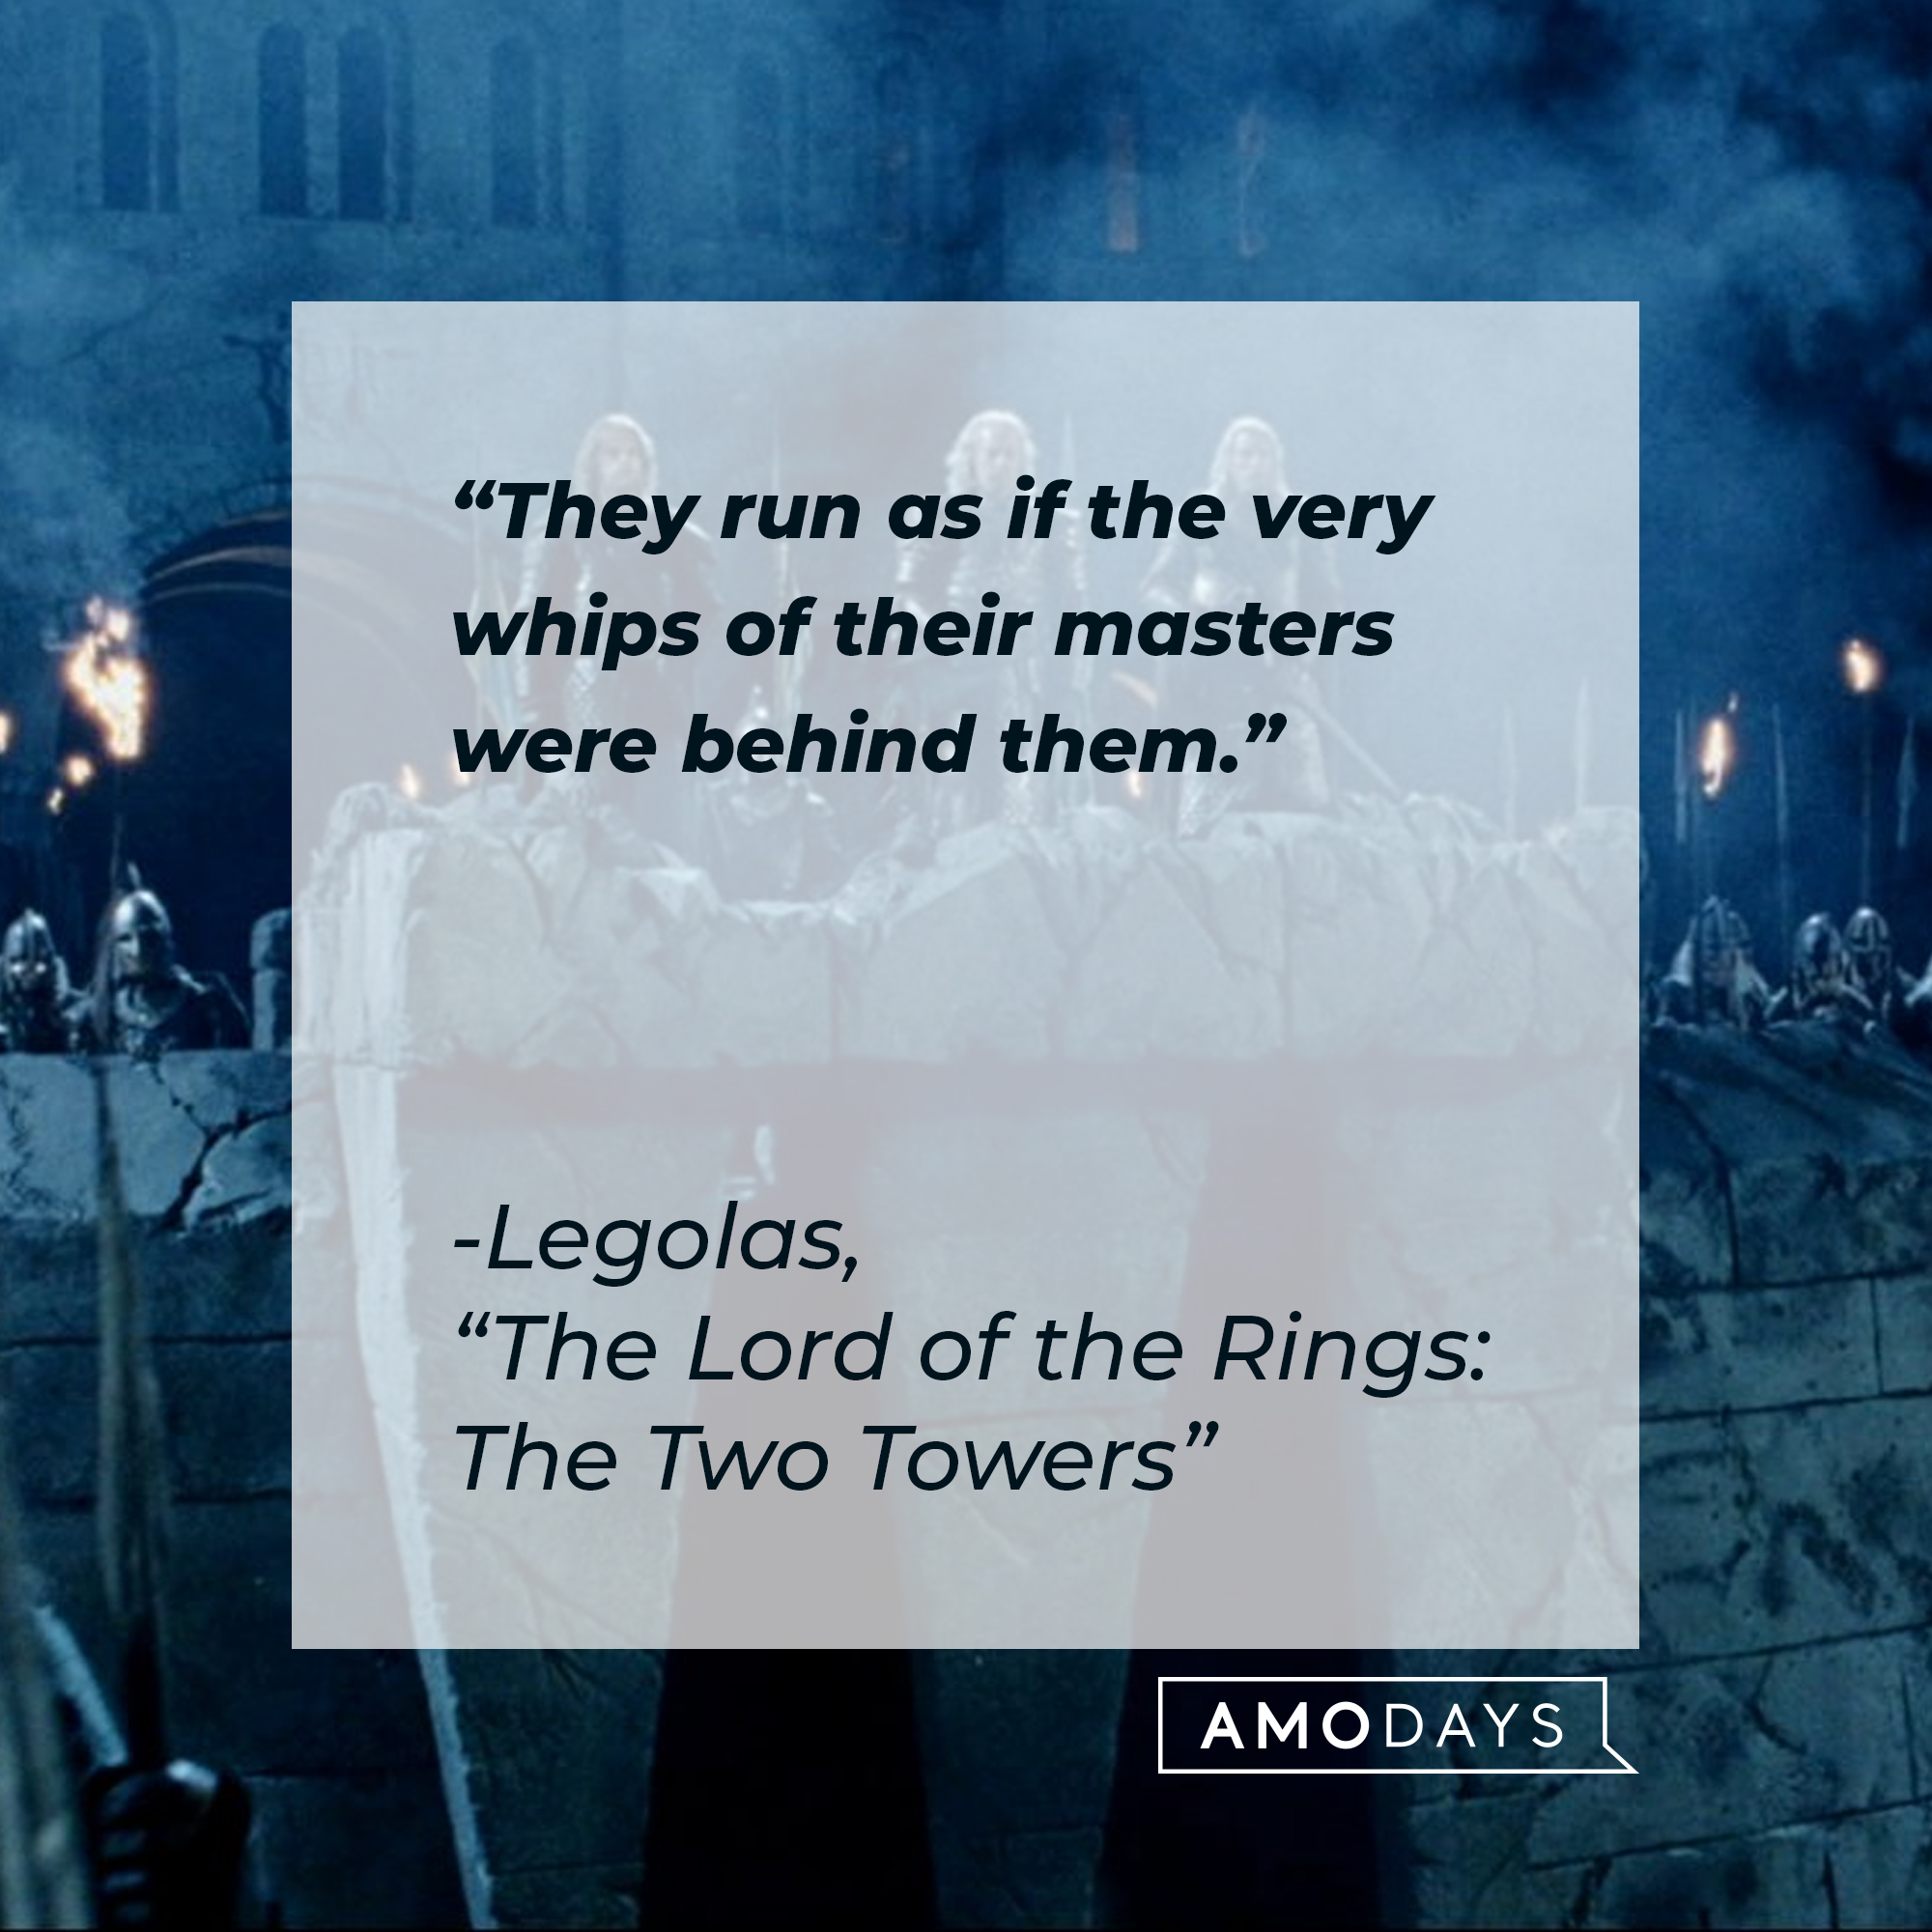 Legolas with his quote: "They run as if the very whips of their masters were behind them."  | Source: Facebook.com/lordoftheringstrilogy